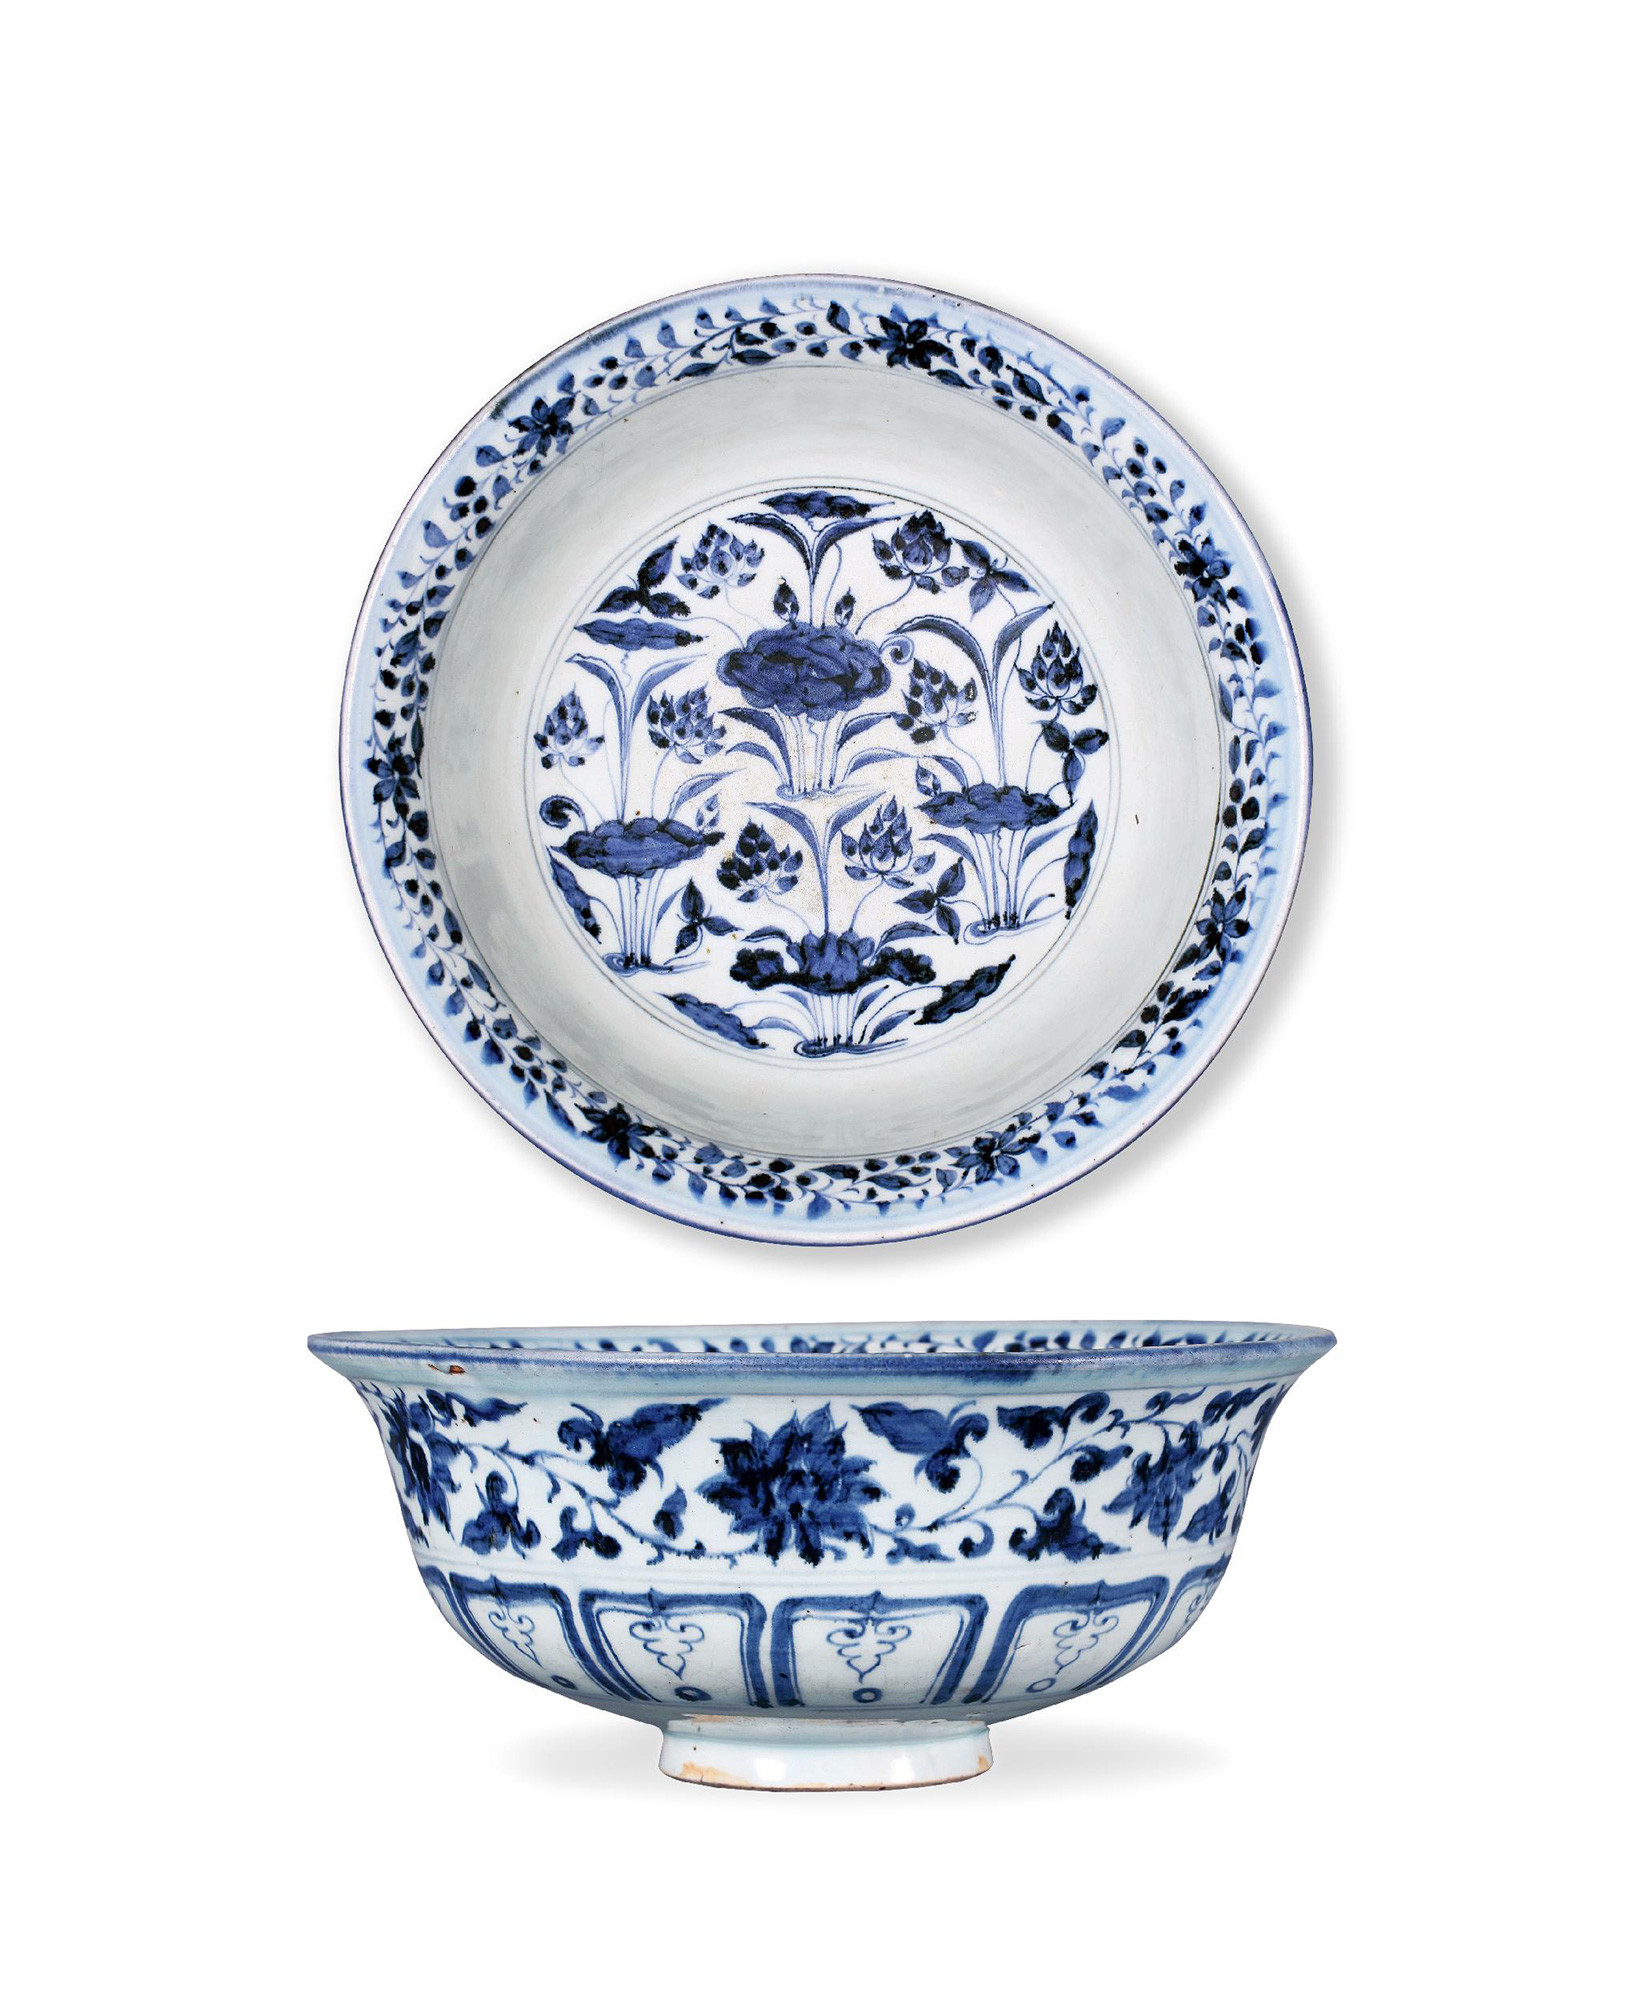 A BLUE AND WHITE BOWL WITH DESIGN OF LOTUS LOTUS POND